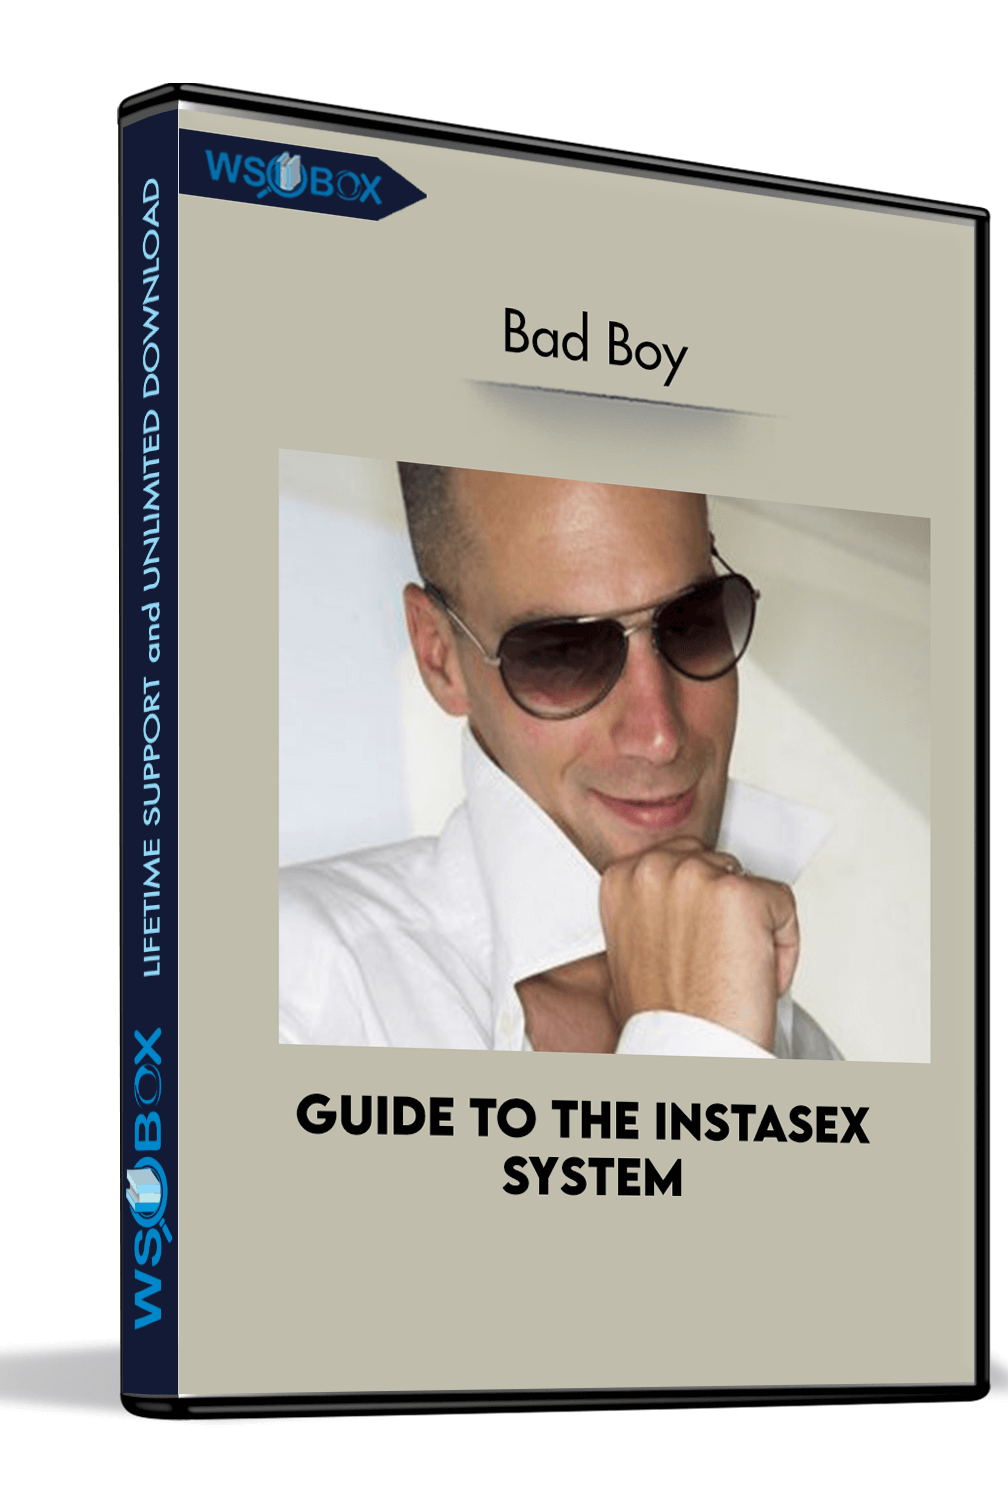 guide-to-the-instasex-system-bad-boy